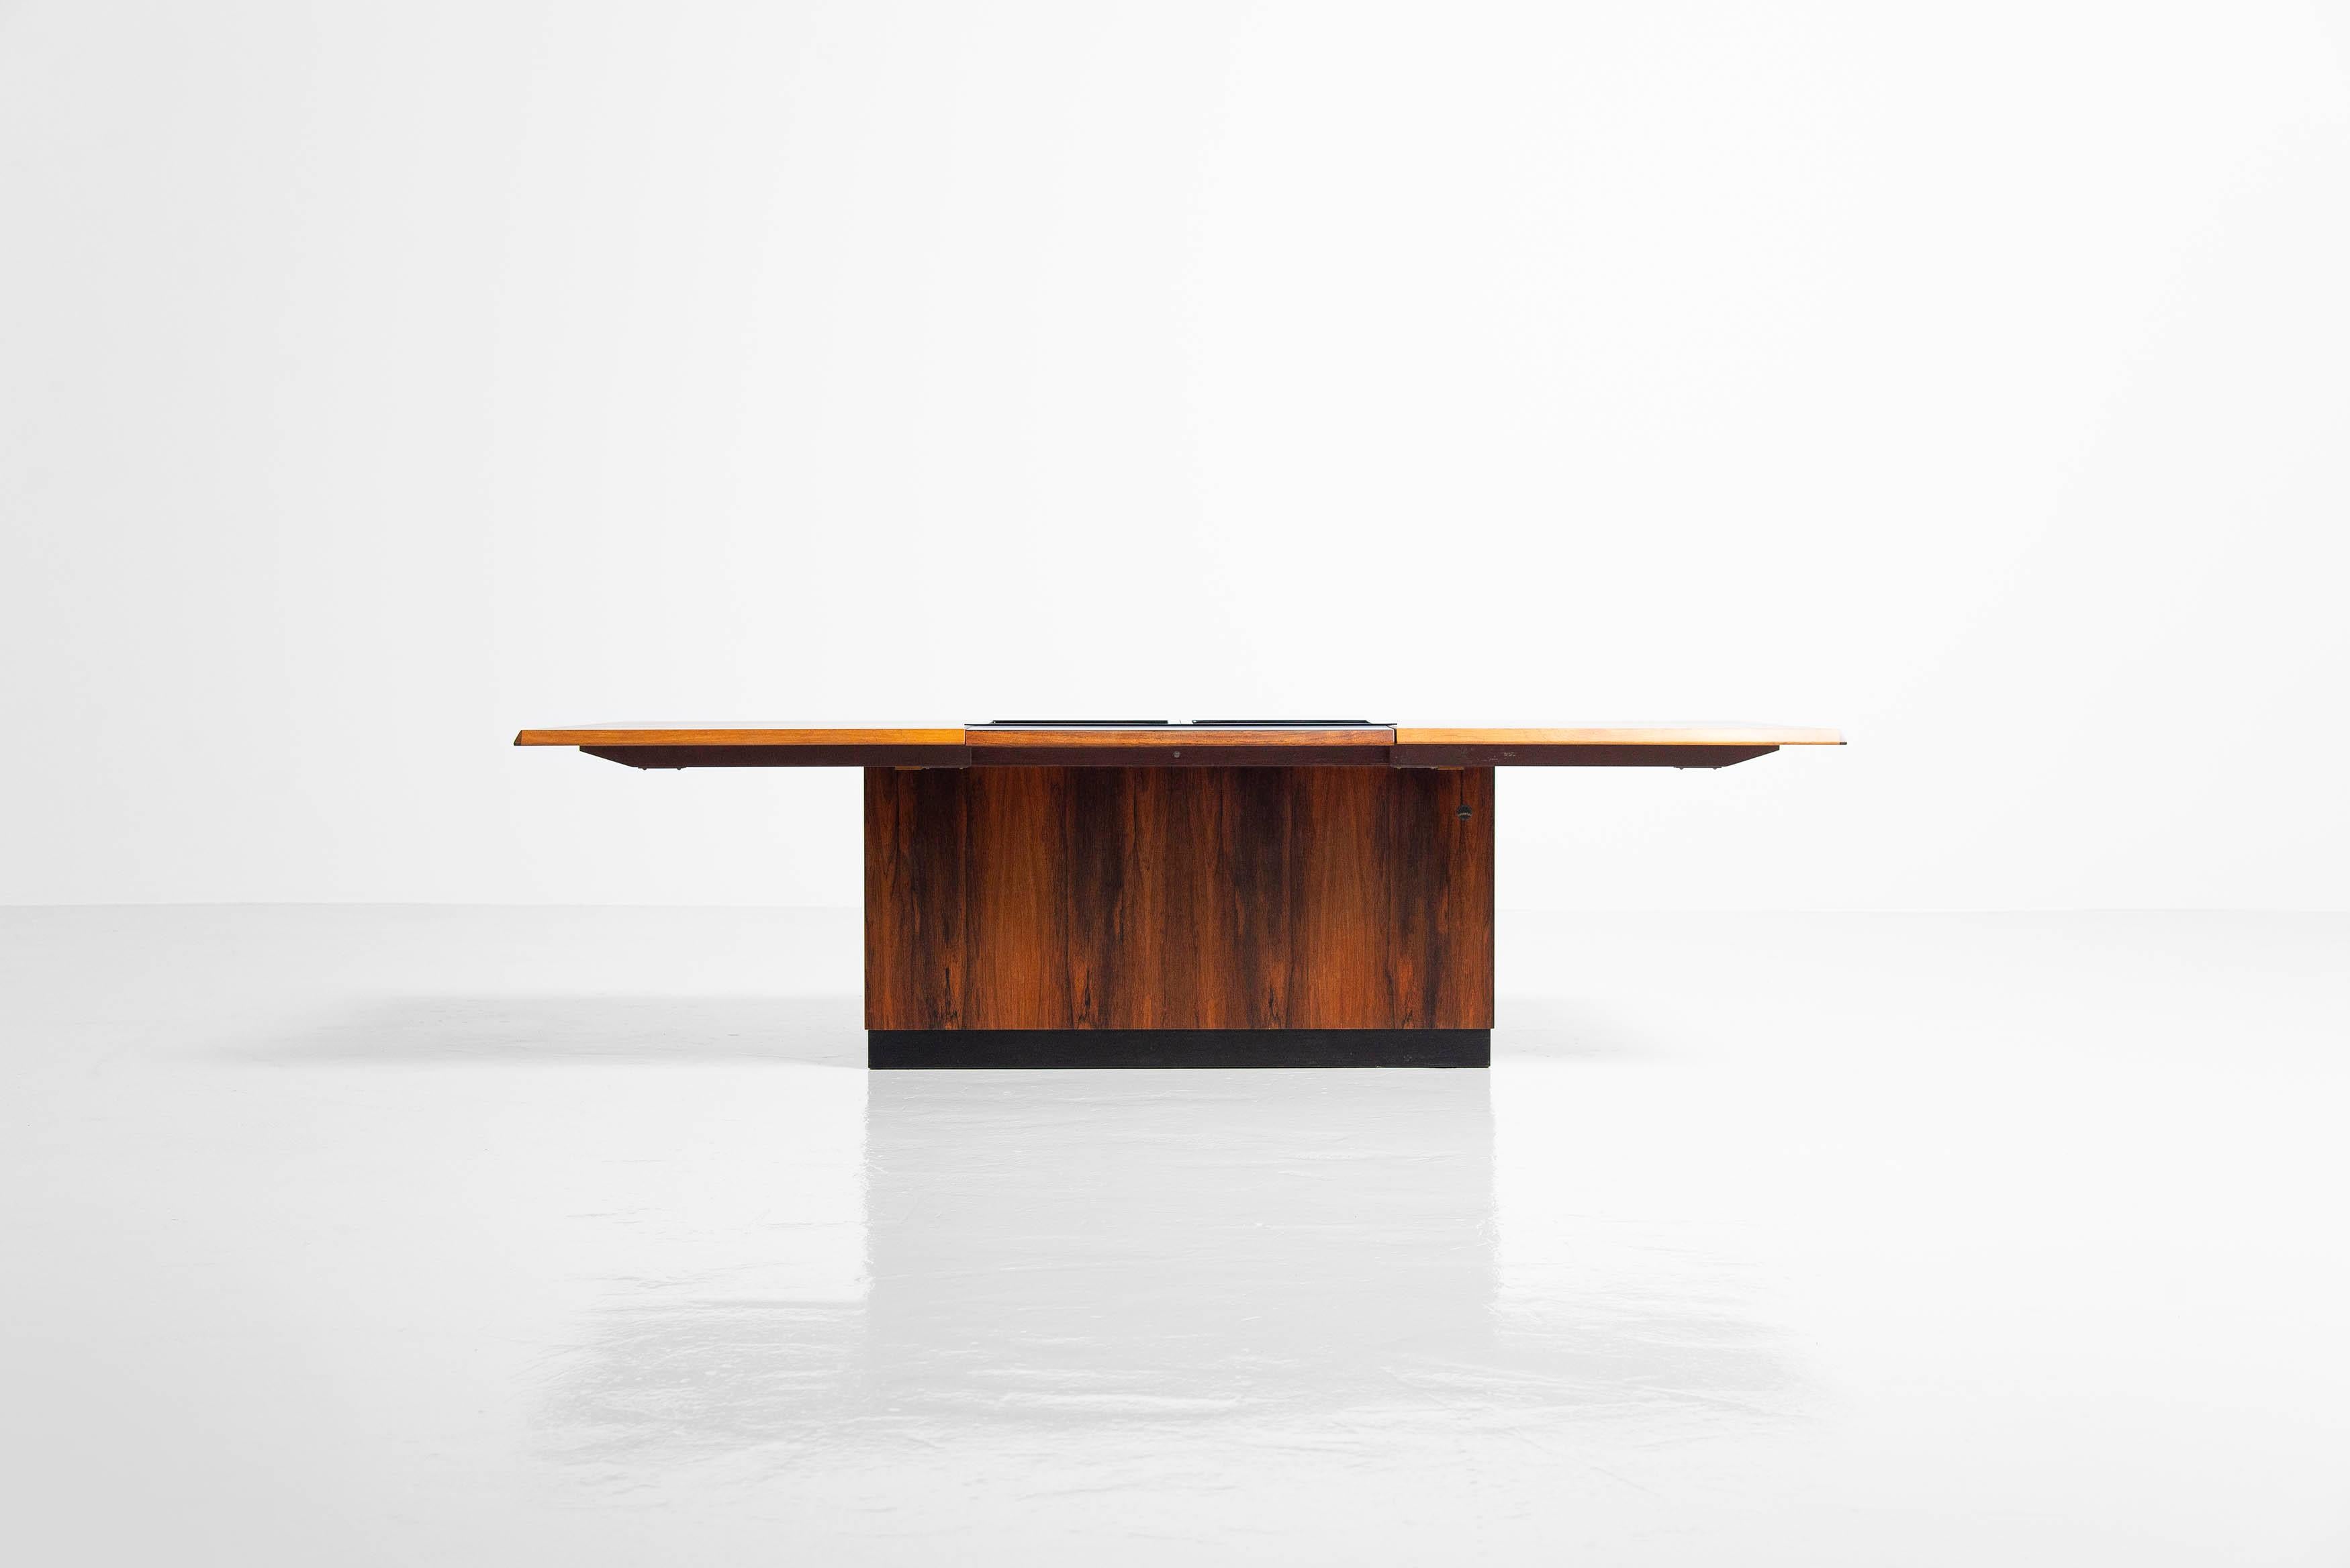 Super stylish coffee table with sliding top and hidden bar which is manufactured by E. Pedersen & Son a-s, Denmark 1960. This coffee table has a sliding top which opens the bar part on the inside, there will fit small and big glasses and drink